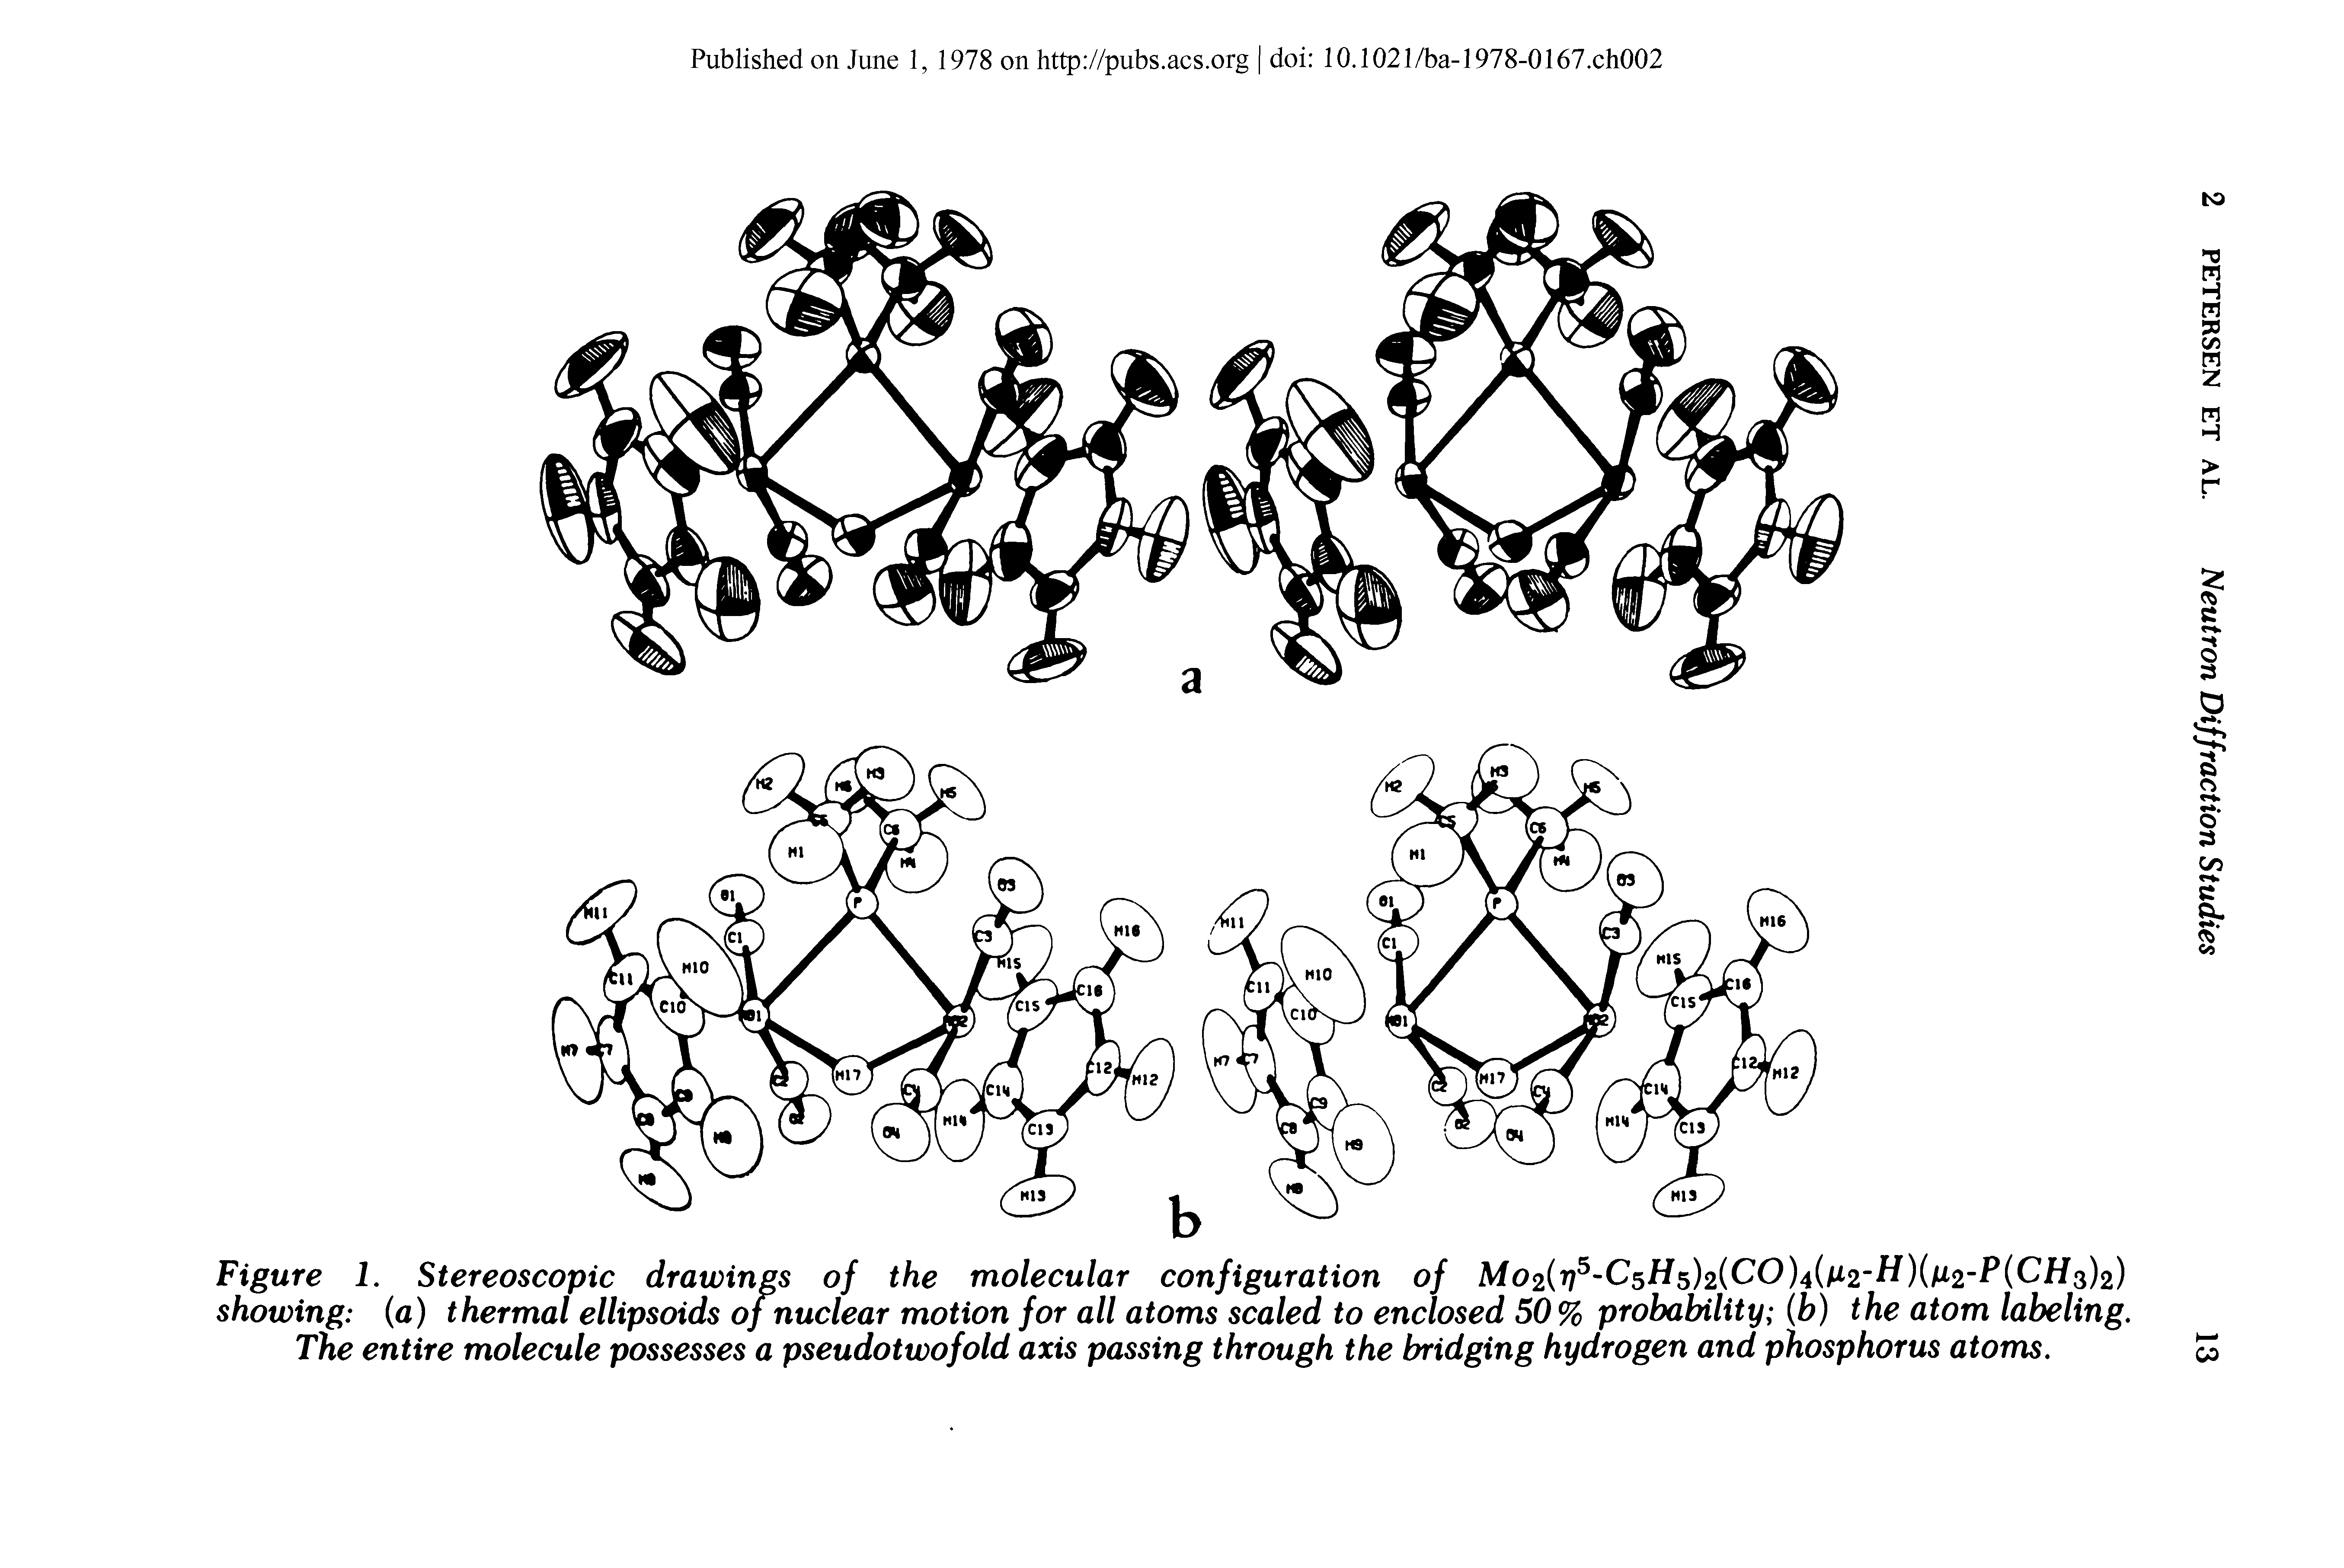 Figure 1. Stereoscopic drawings of the molecular configuration of Mo2 r C H )2 CO)4t 2-H) g2-P CH )2) showing (a) thermal ellipsoids of nuclear motion for all atoms scaled to enclosed 50% probability (b) the atom labeling. The entire molecule possesses a pseudotwofold axis passing through the bridging hydrogen and phosphorus atoms.